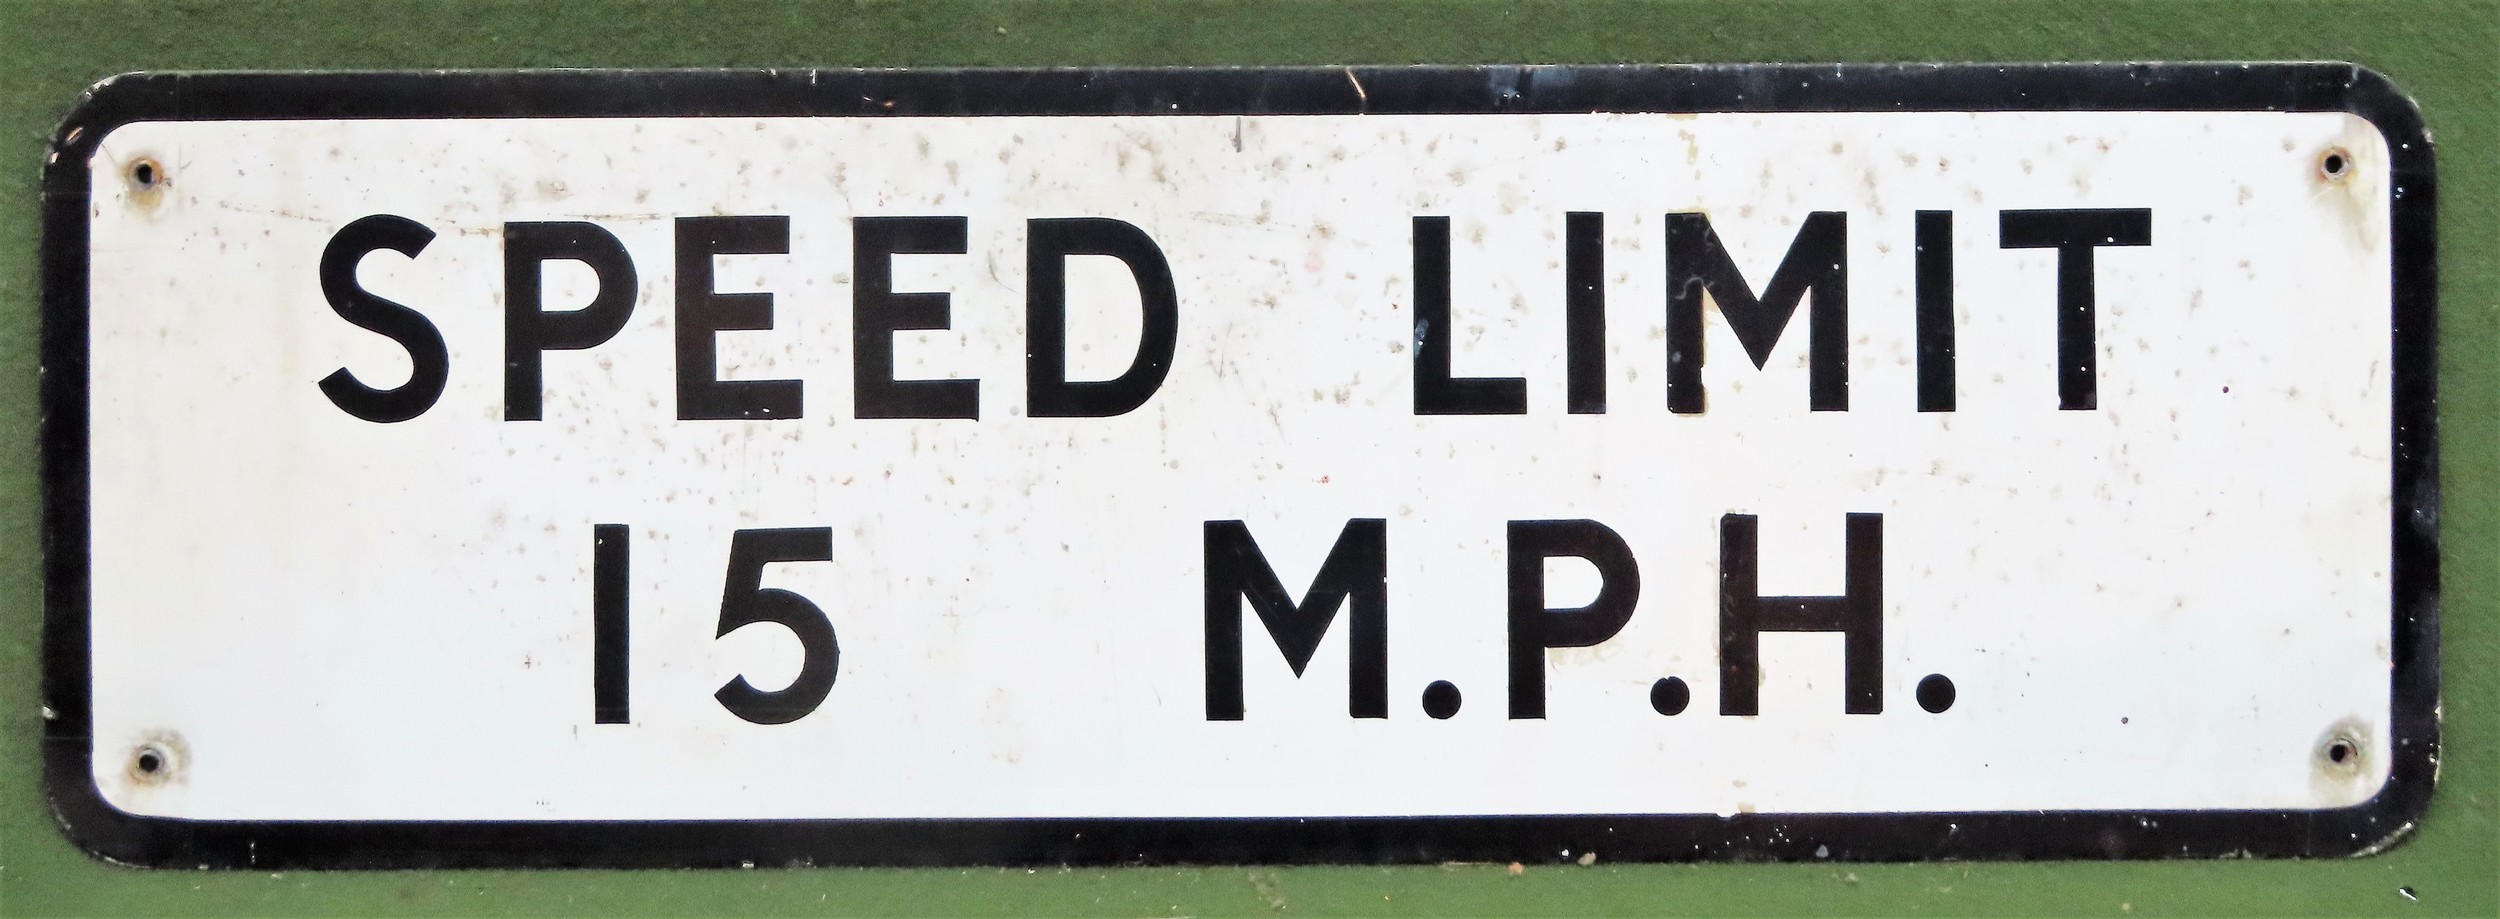 Speed limit 15 M.P.H aluminium sign. Approx. 20.5 x 61cm Used condition, wear to sign